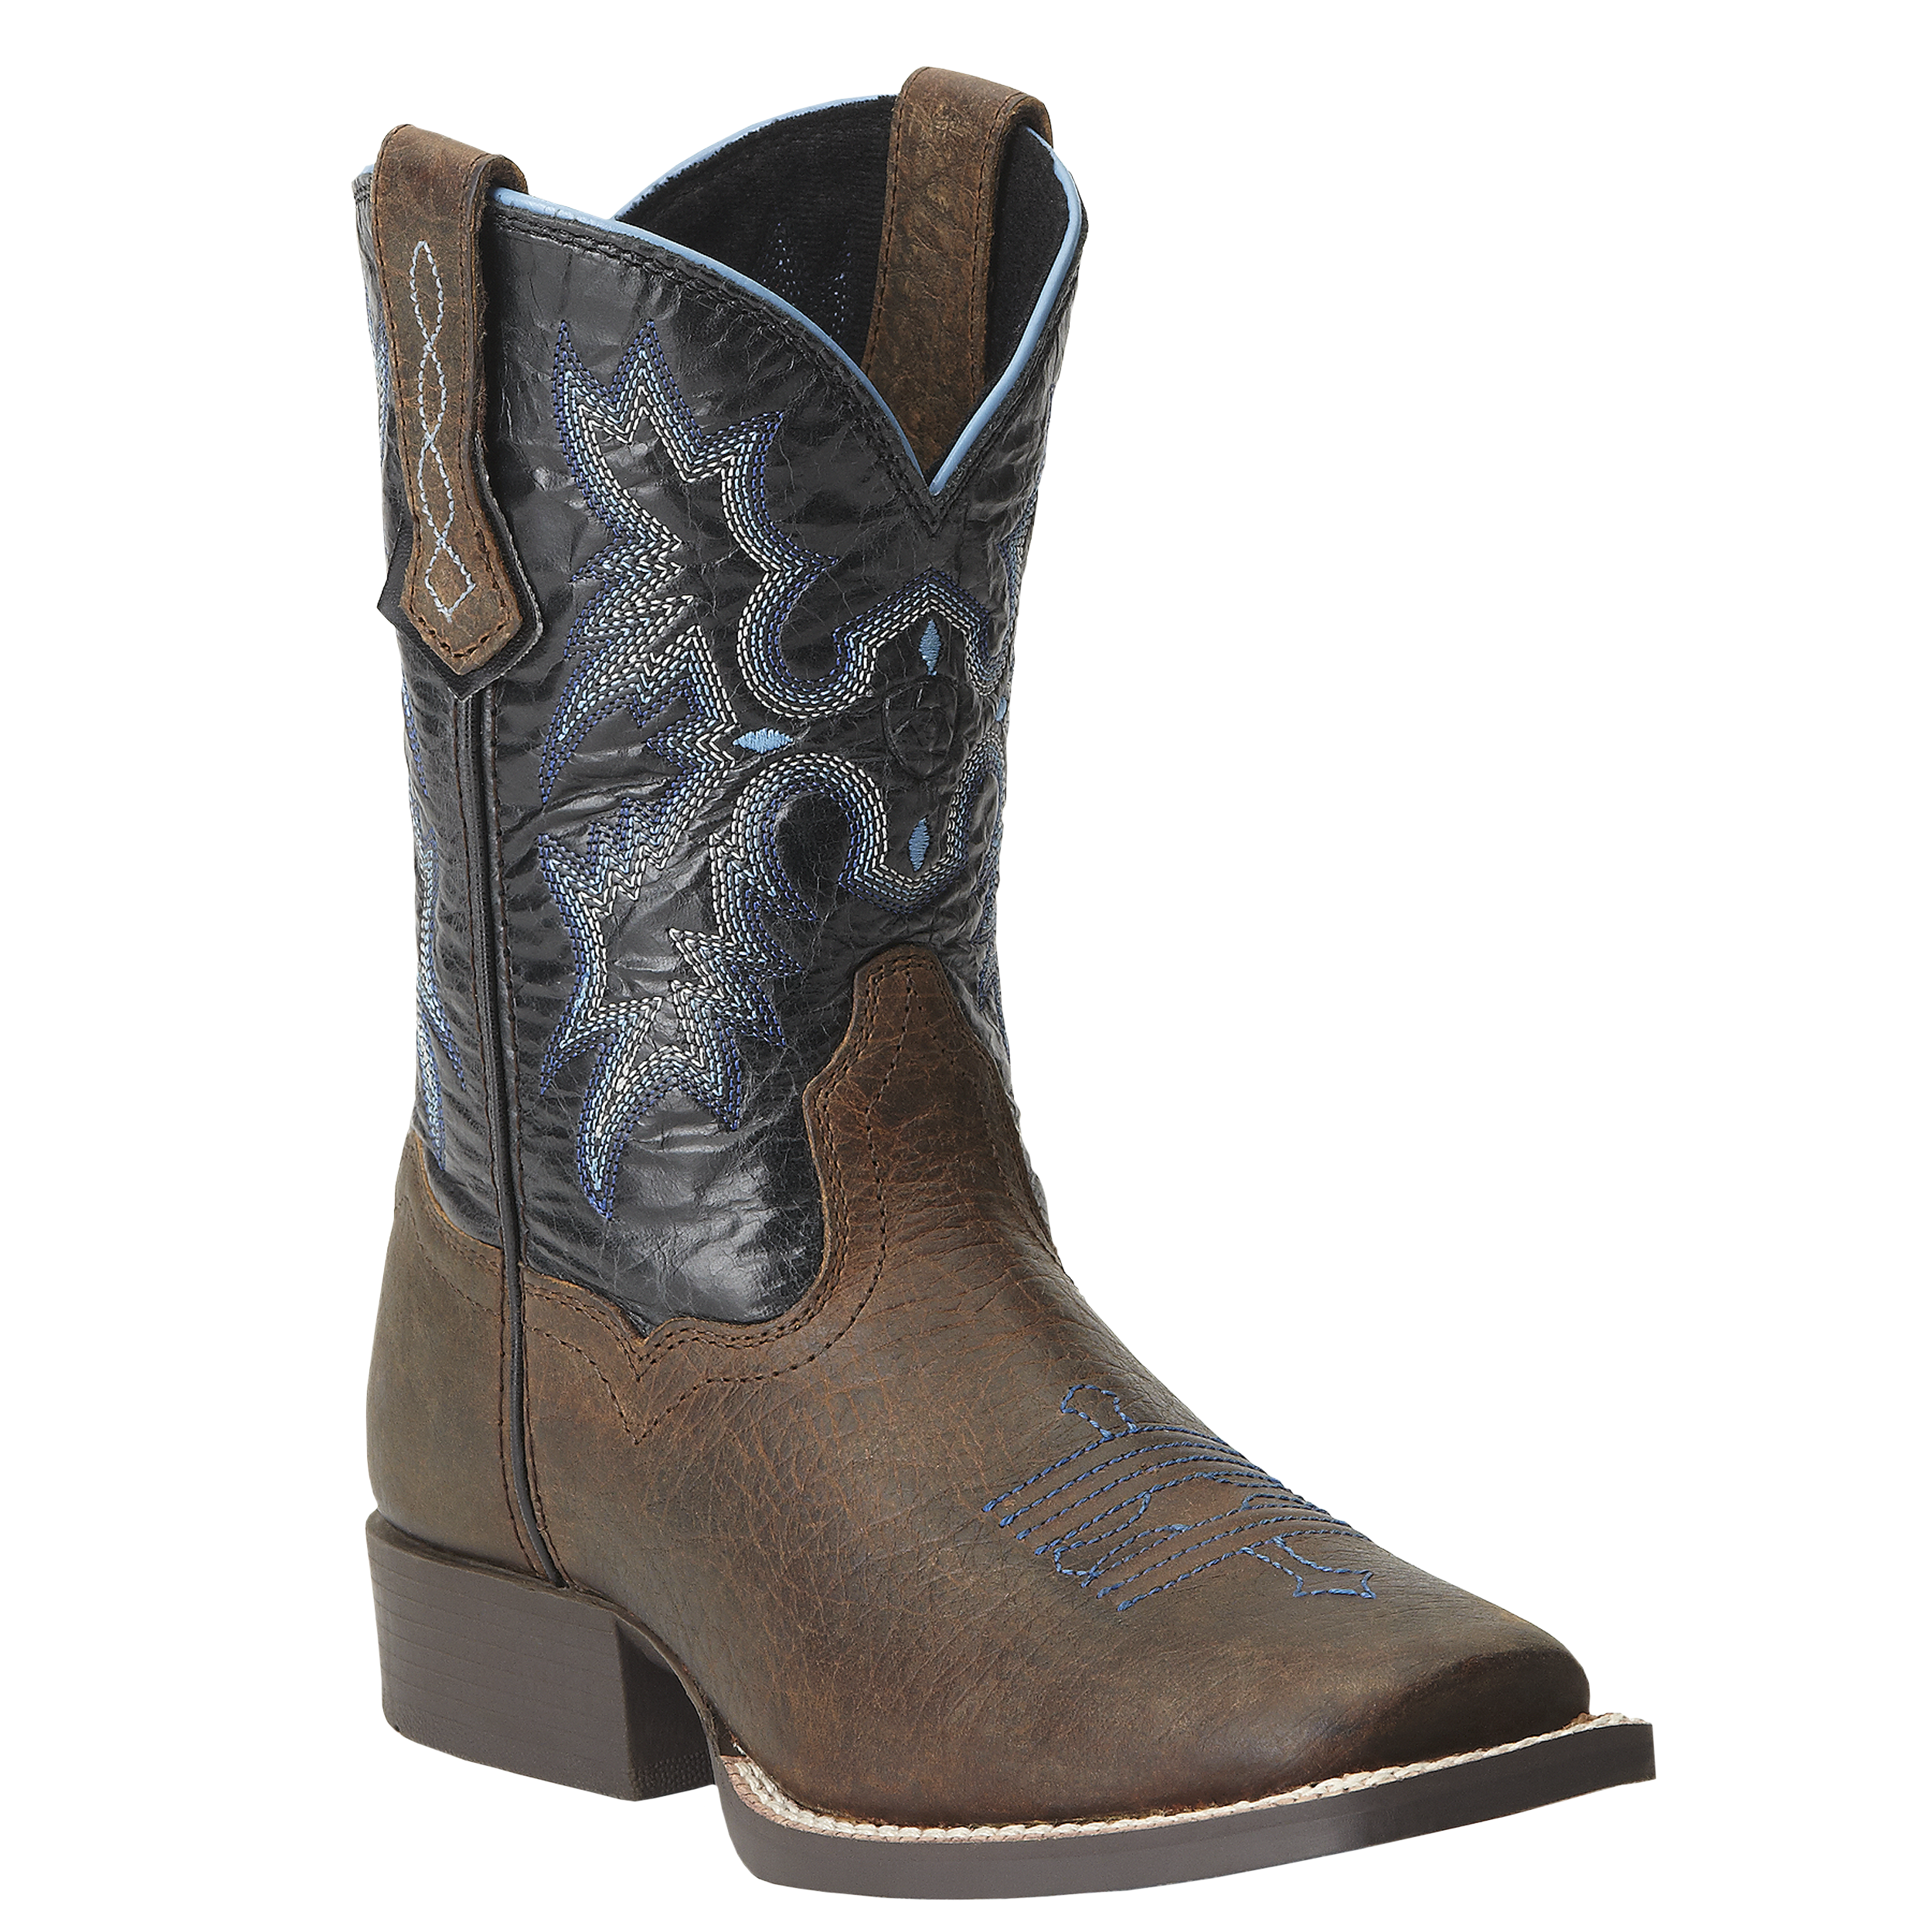 Ariat Tombstone Western Boots for Toddlers or Kids